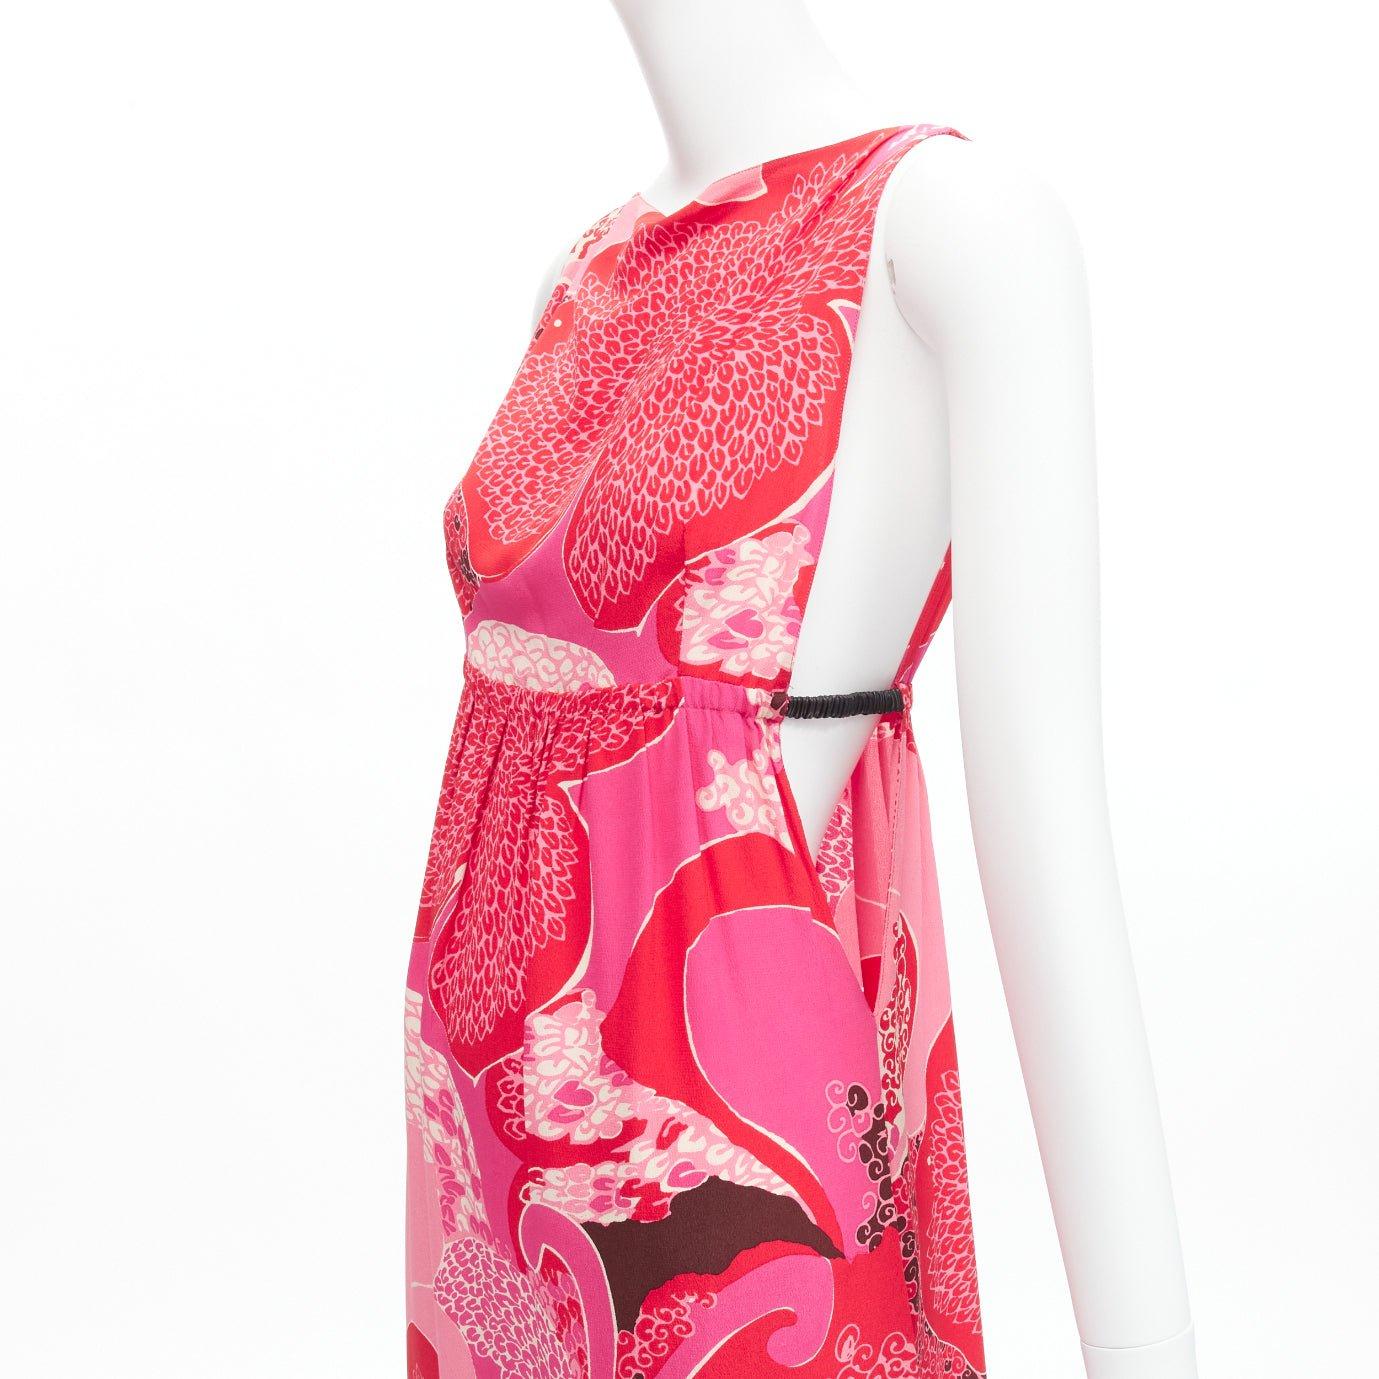 GUCCI TOM FORD Vintage Runway red pink floral print silk side cutout leather strap dress IT42 M
Reference: TGAS/D00469
Brand: Gucci
Designer: Tom Ford
Collection: Runway
Material: Silk, Leather
Color: Red, Pink
Pattern: Floral
Closure: Slip On
Extra